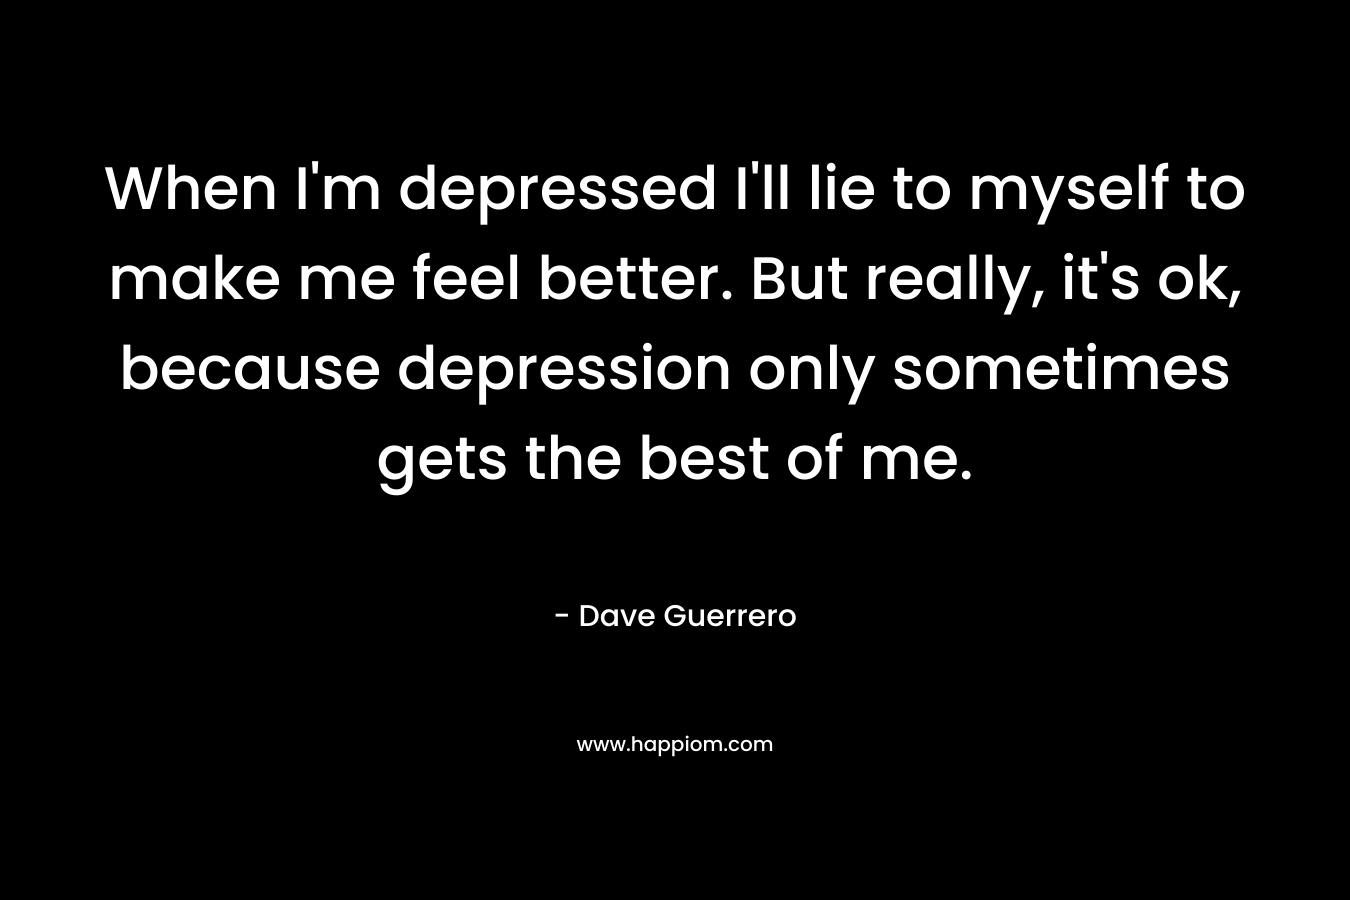 When I’m depressed I’ll lie to myself to make me feel better. But really, it’s ok, because depression only sometimes gets the best of me. – Dave Guerrero